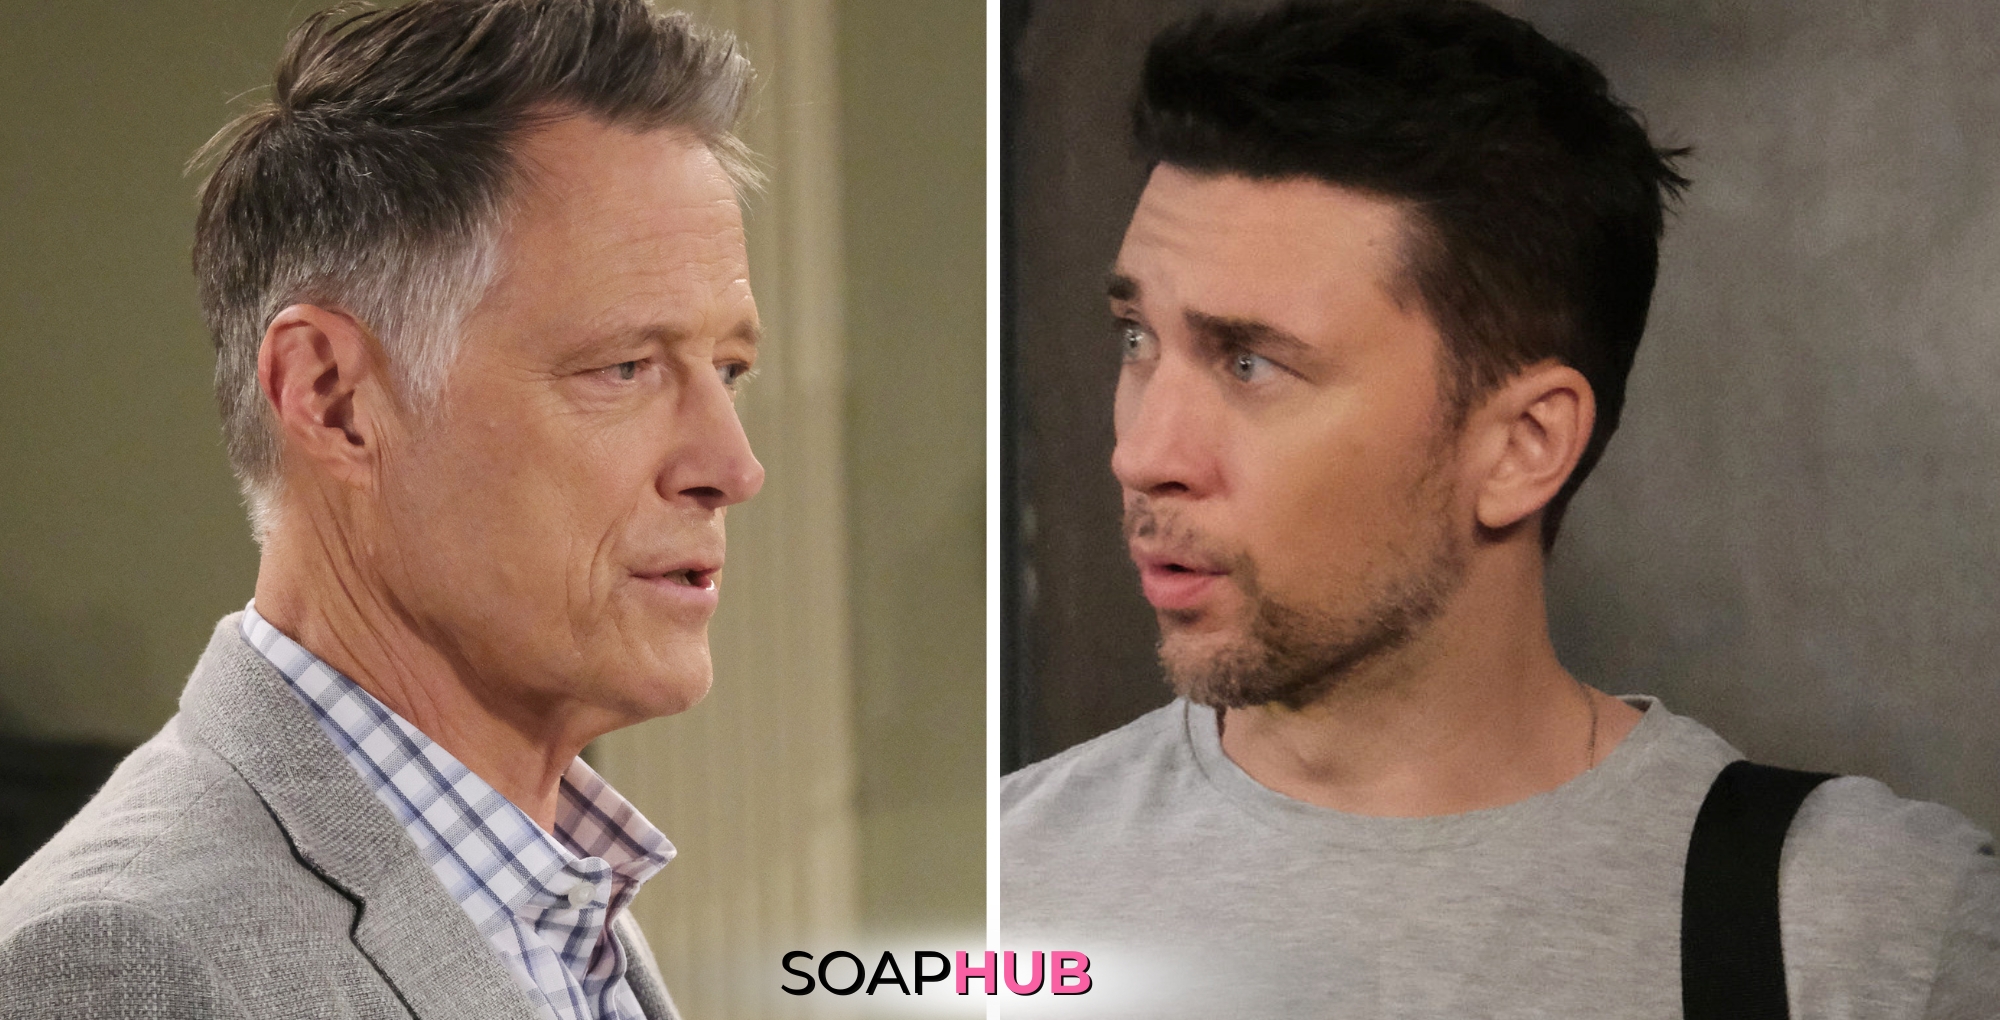 Days of our Lives spoilers for July 10 with Chad, Jack, and the Soap Hub logo.